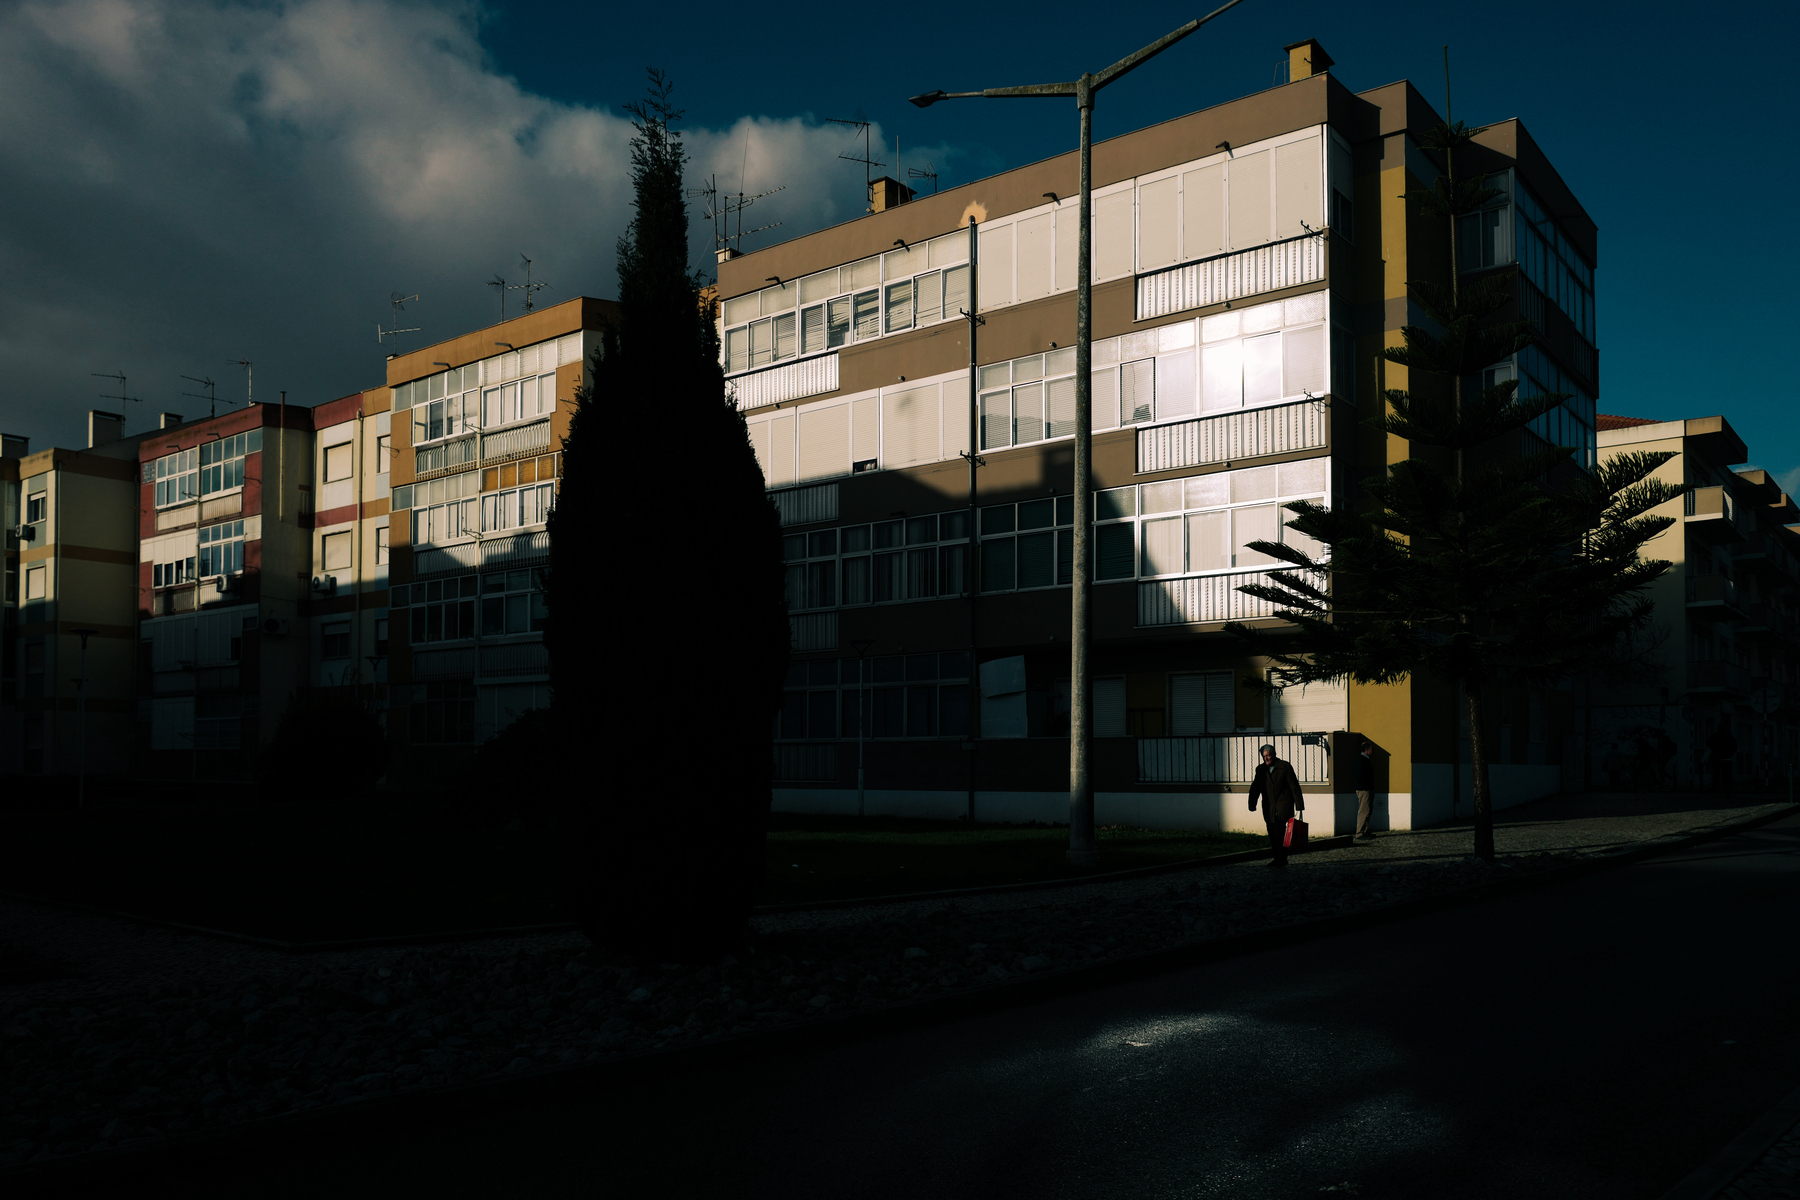 A shadowy street scene with a lone individual walking past a row of multi-story, colorful apartment buildings, highlighted by sunlight and contrasted by dark shadows, with trees interspersed along the sidewalk.